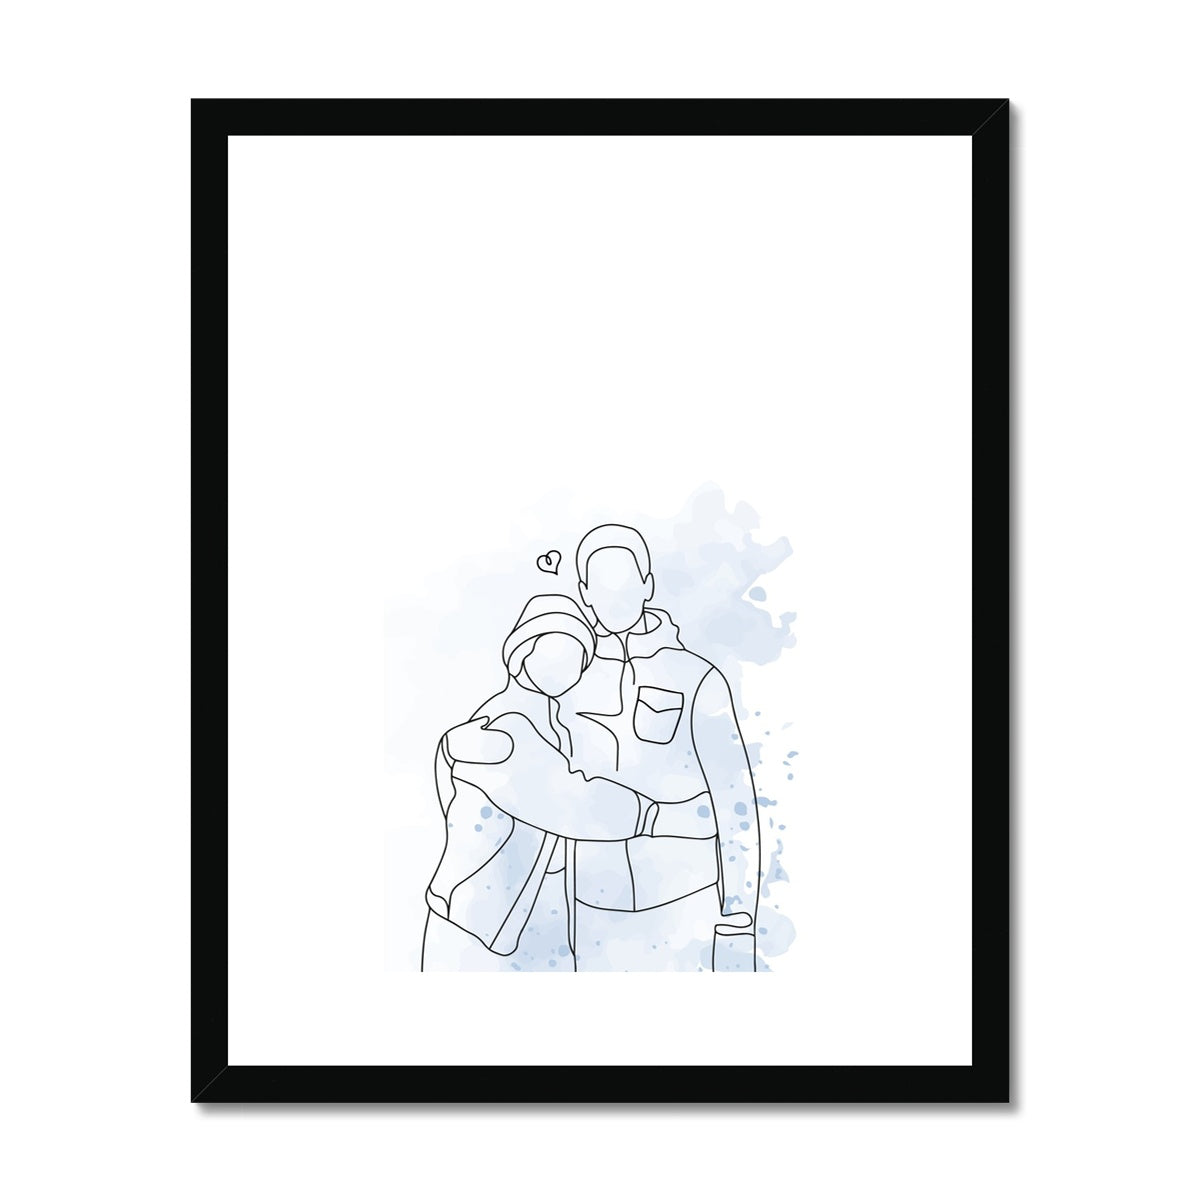 Lovers Line Drawing Framed & Mounted Print